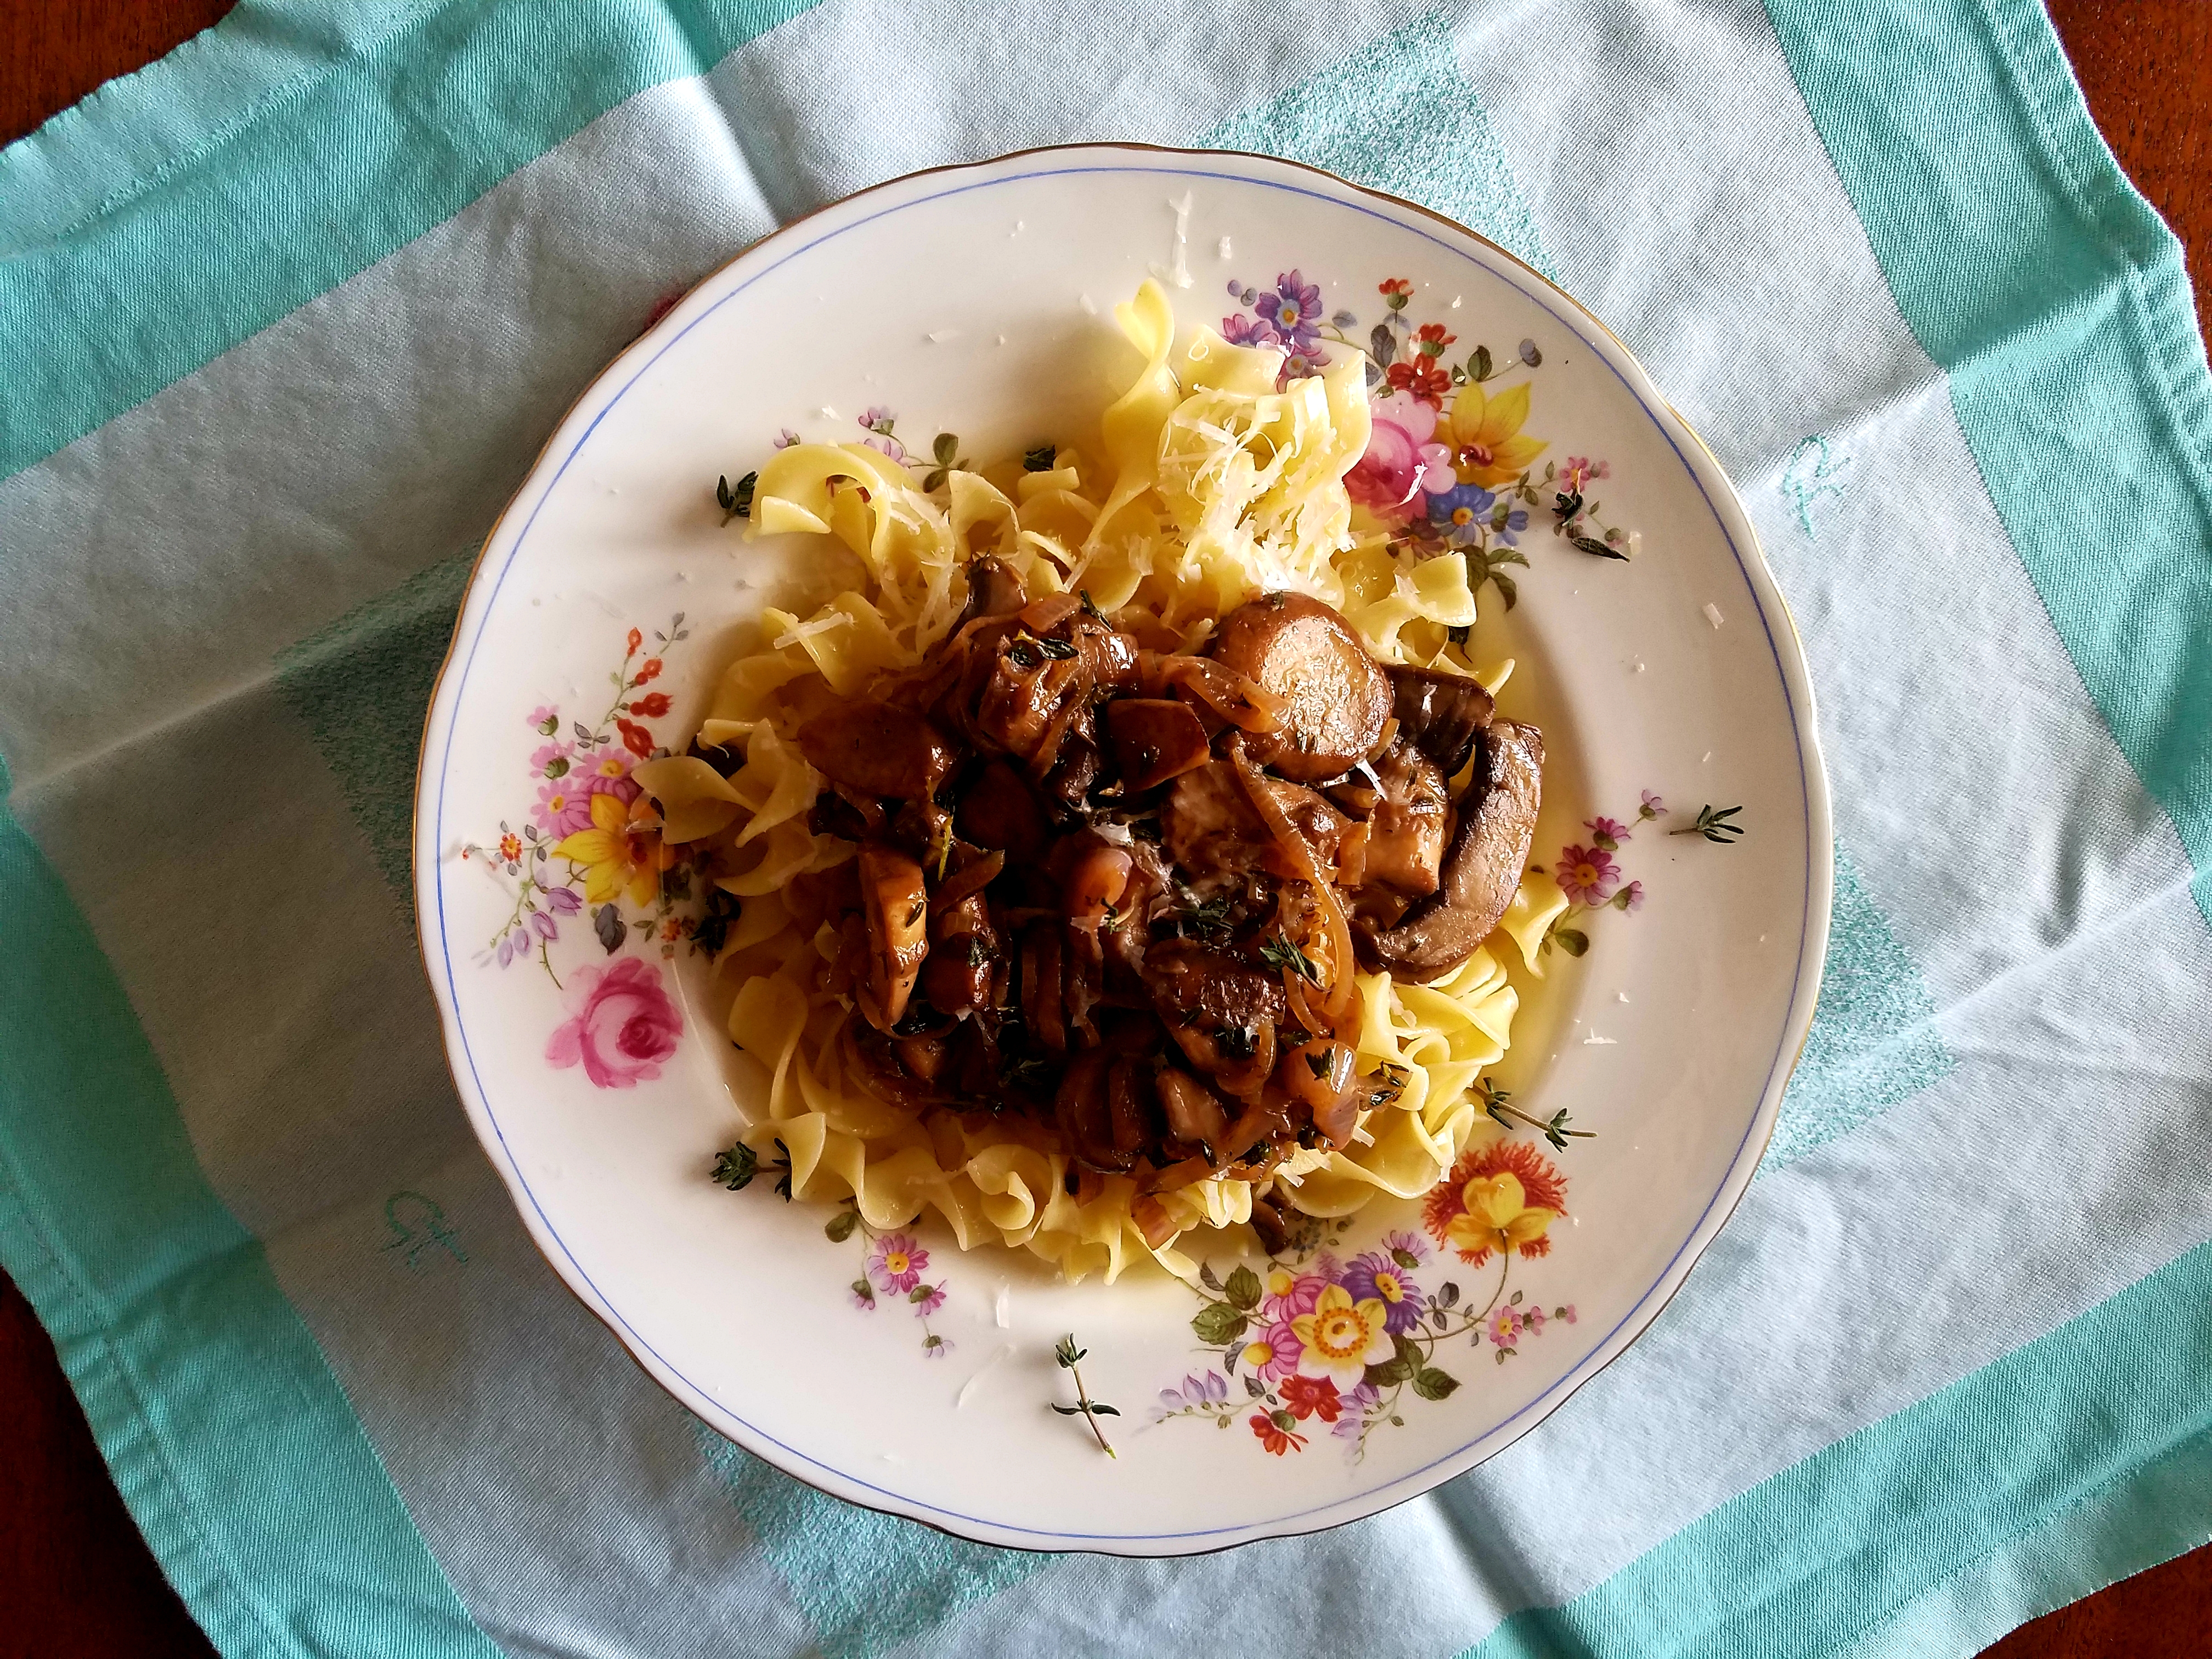 Mushroom Thyme Pasta (Recipe Inspired by TWO STEPS FORWARD)